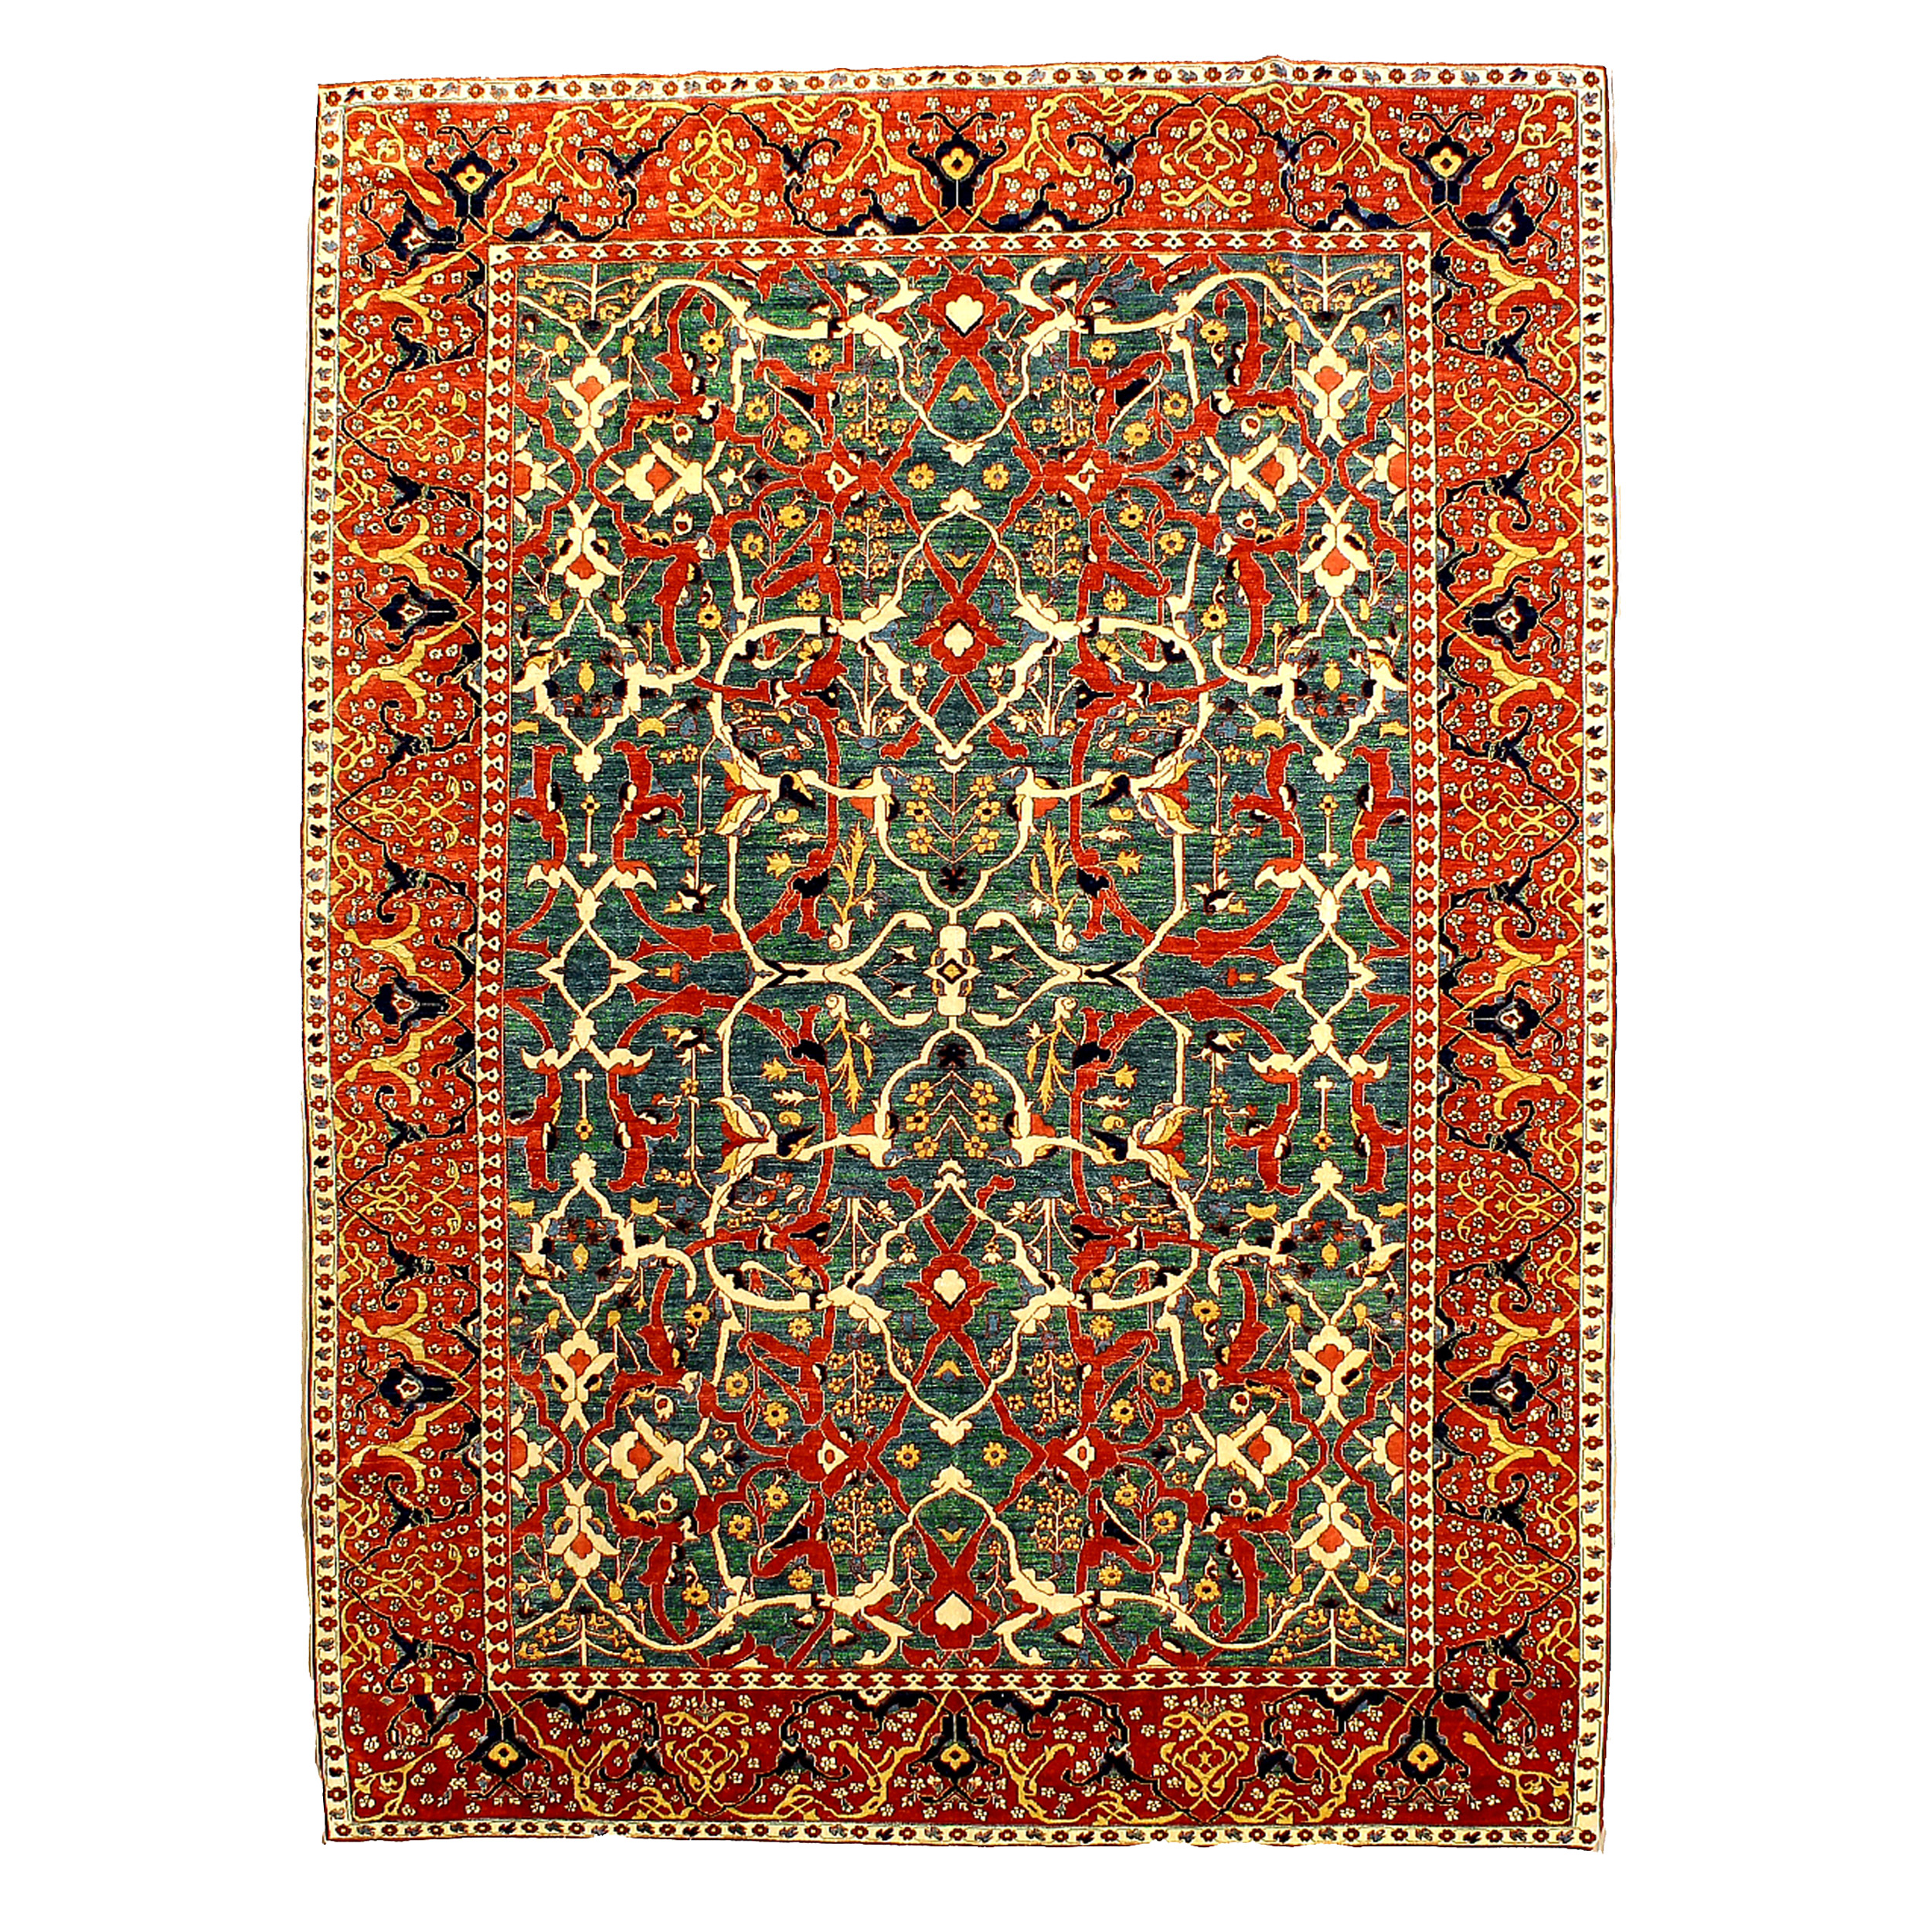 A new, hand woven carpet from Azerbaijan with an Arabesque design on a green field framed by a red border - Douglas Stock Gallery, fine hand woven Oriental carpets Boston,MA area, South Natick